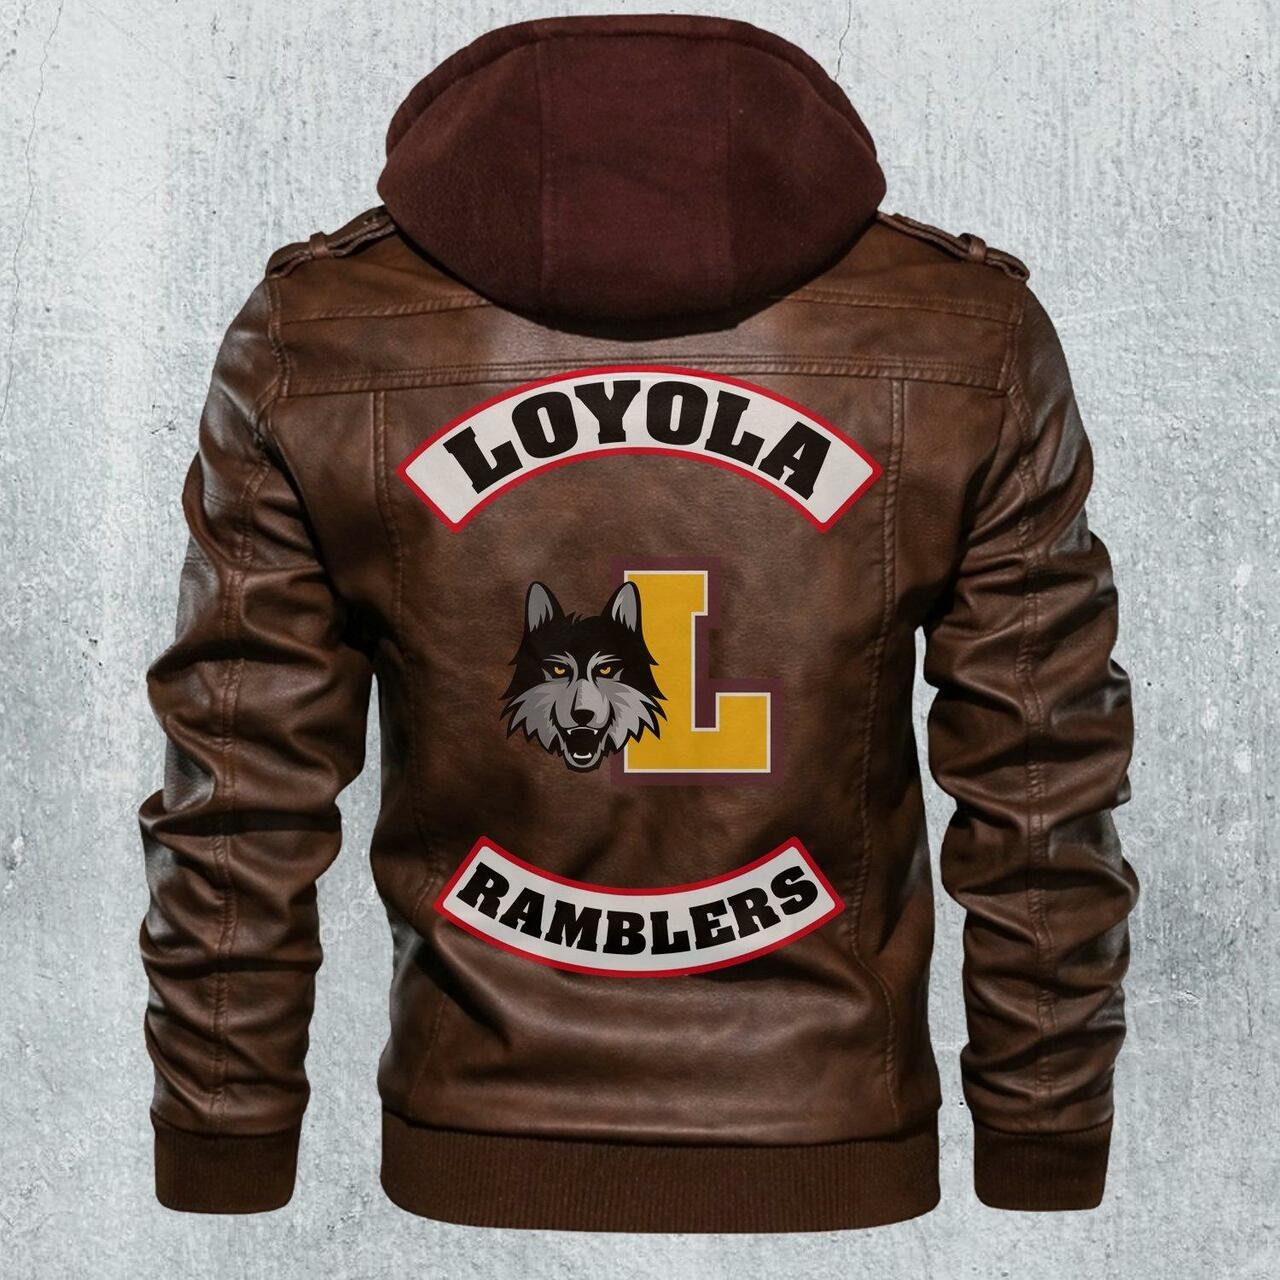 Our store has all of the latest leather jacket 87